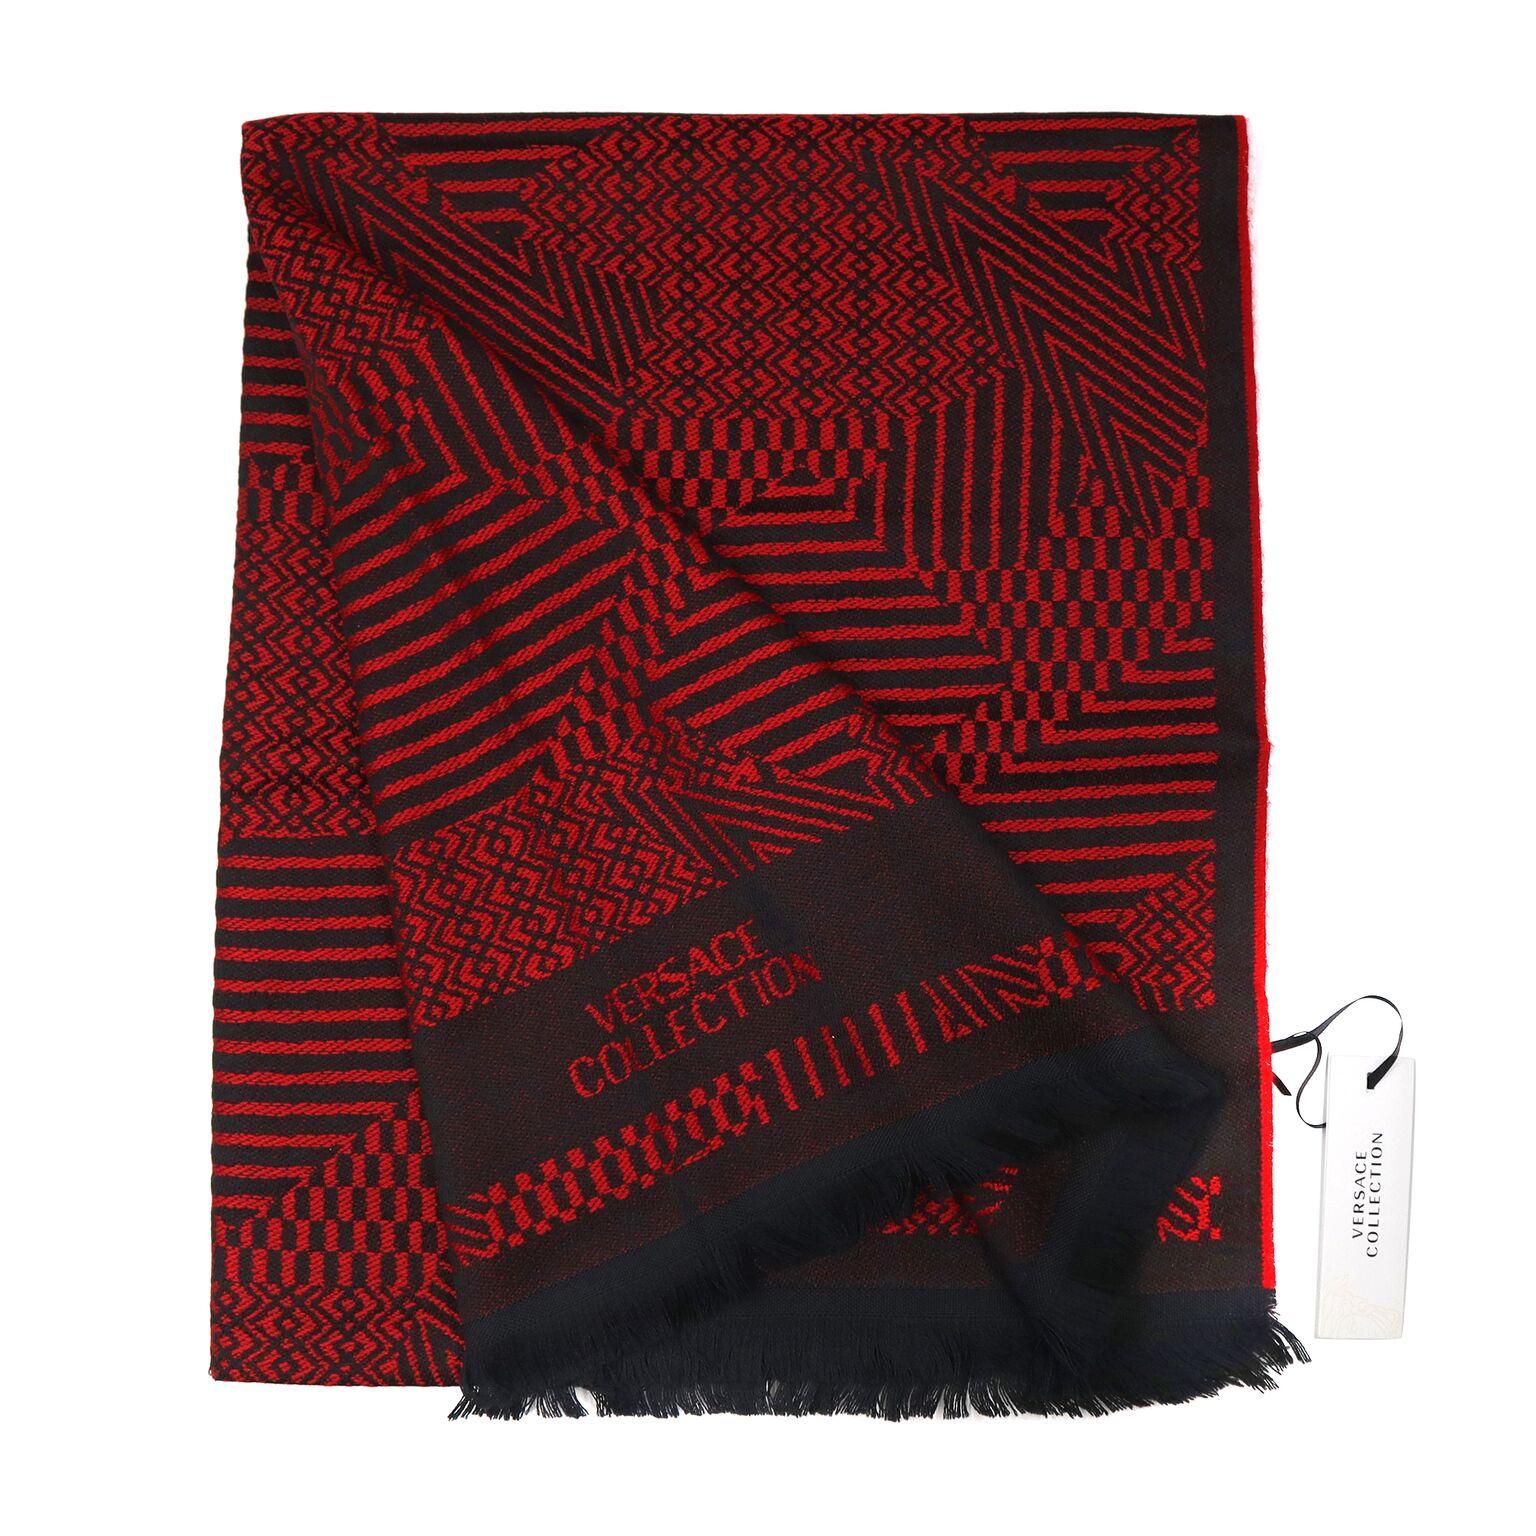 This is beautiful Versace black & red men's scarf made of 75% Wool 25% Acrylic
Length -74 Inches and Width -28.75 Inches
Made in Italy.
